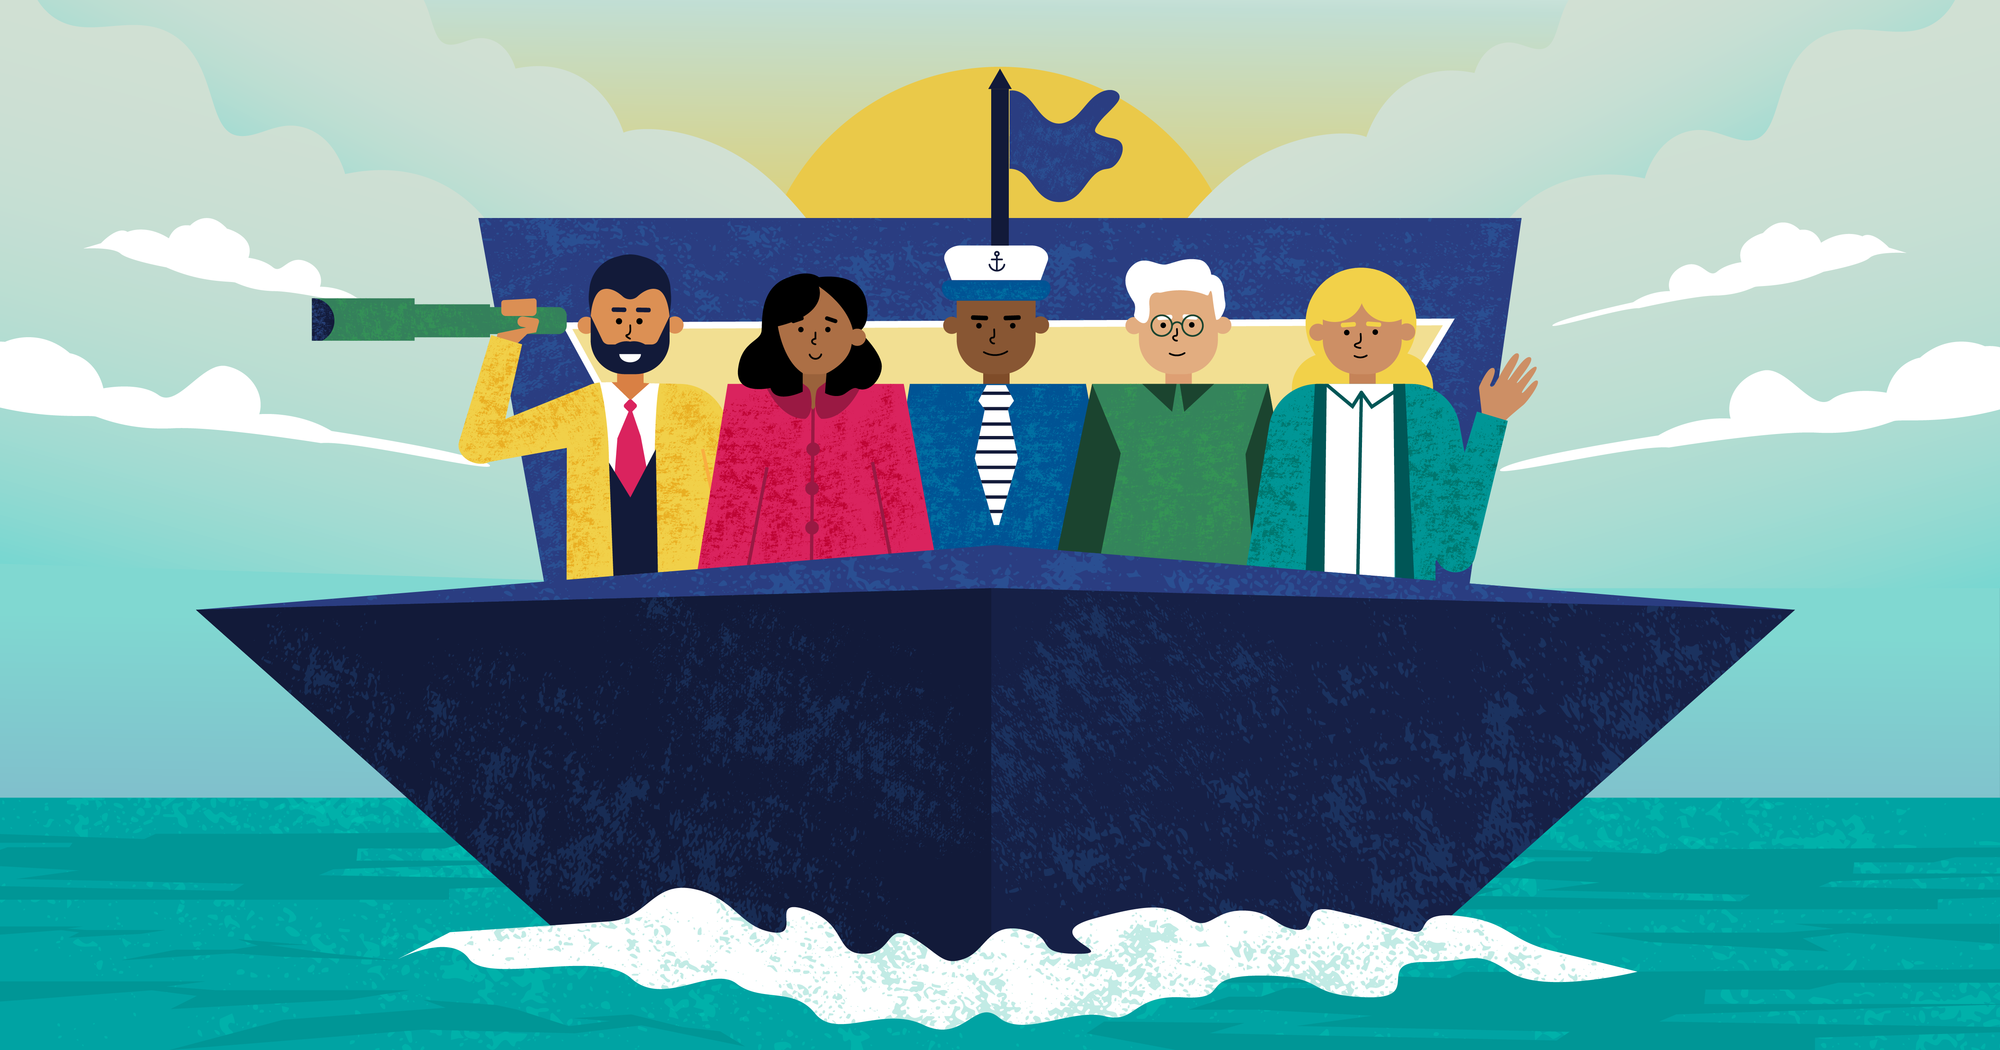 Image of people on a boat